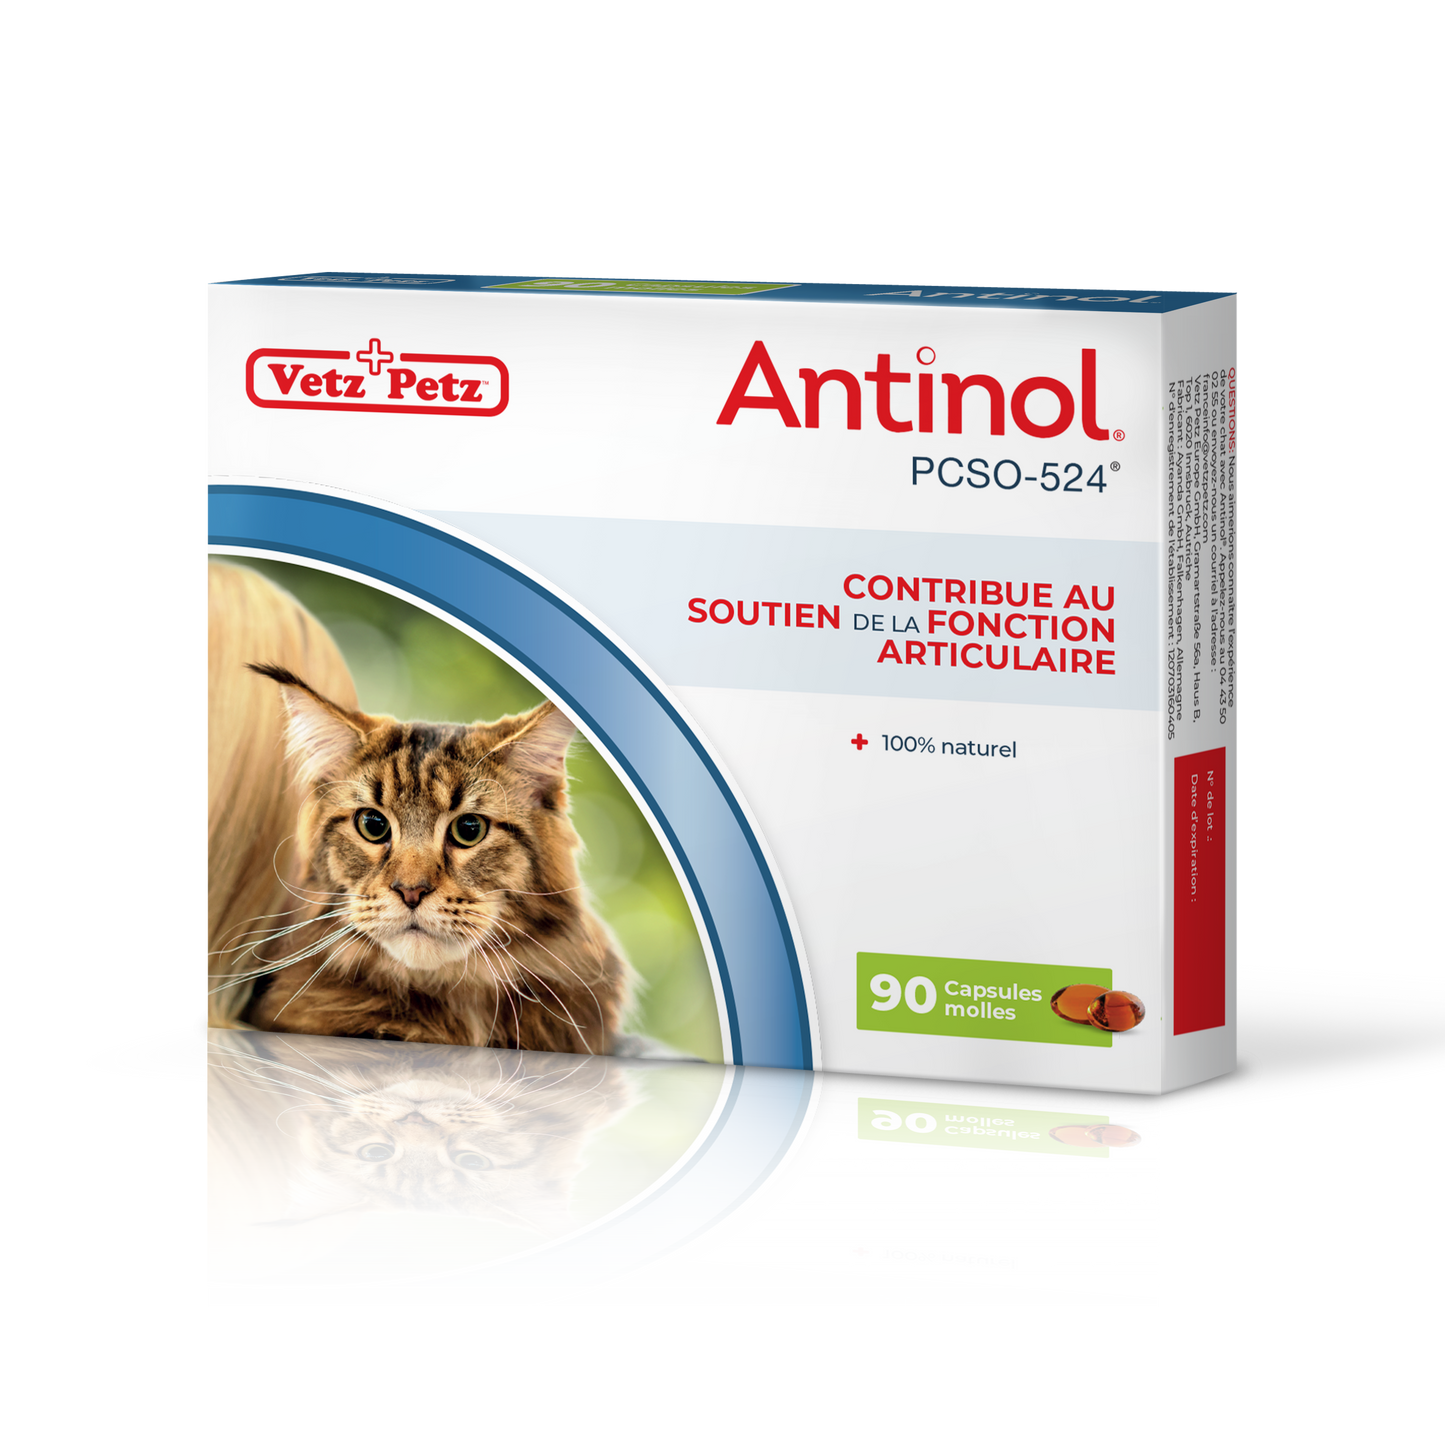 Antinol for cats